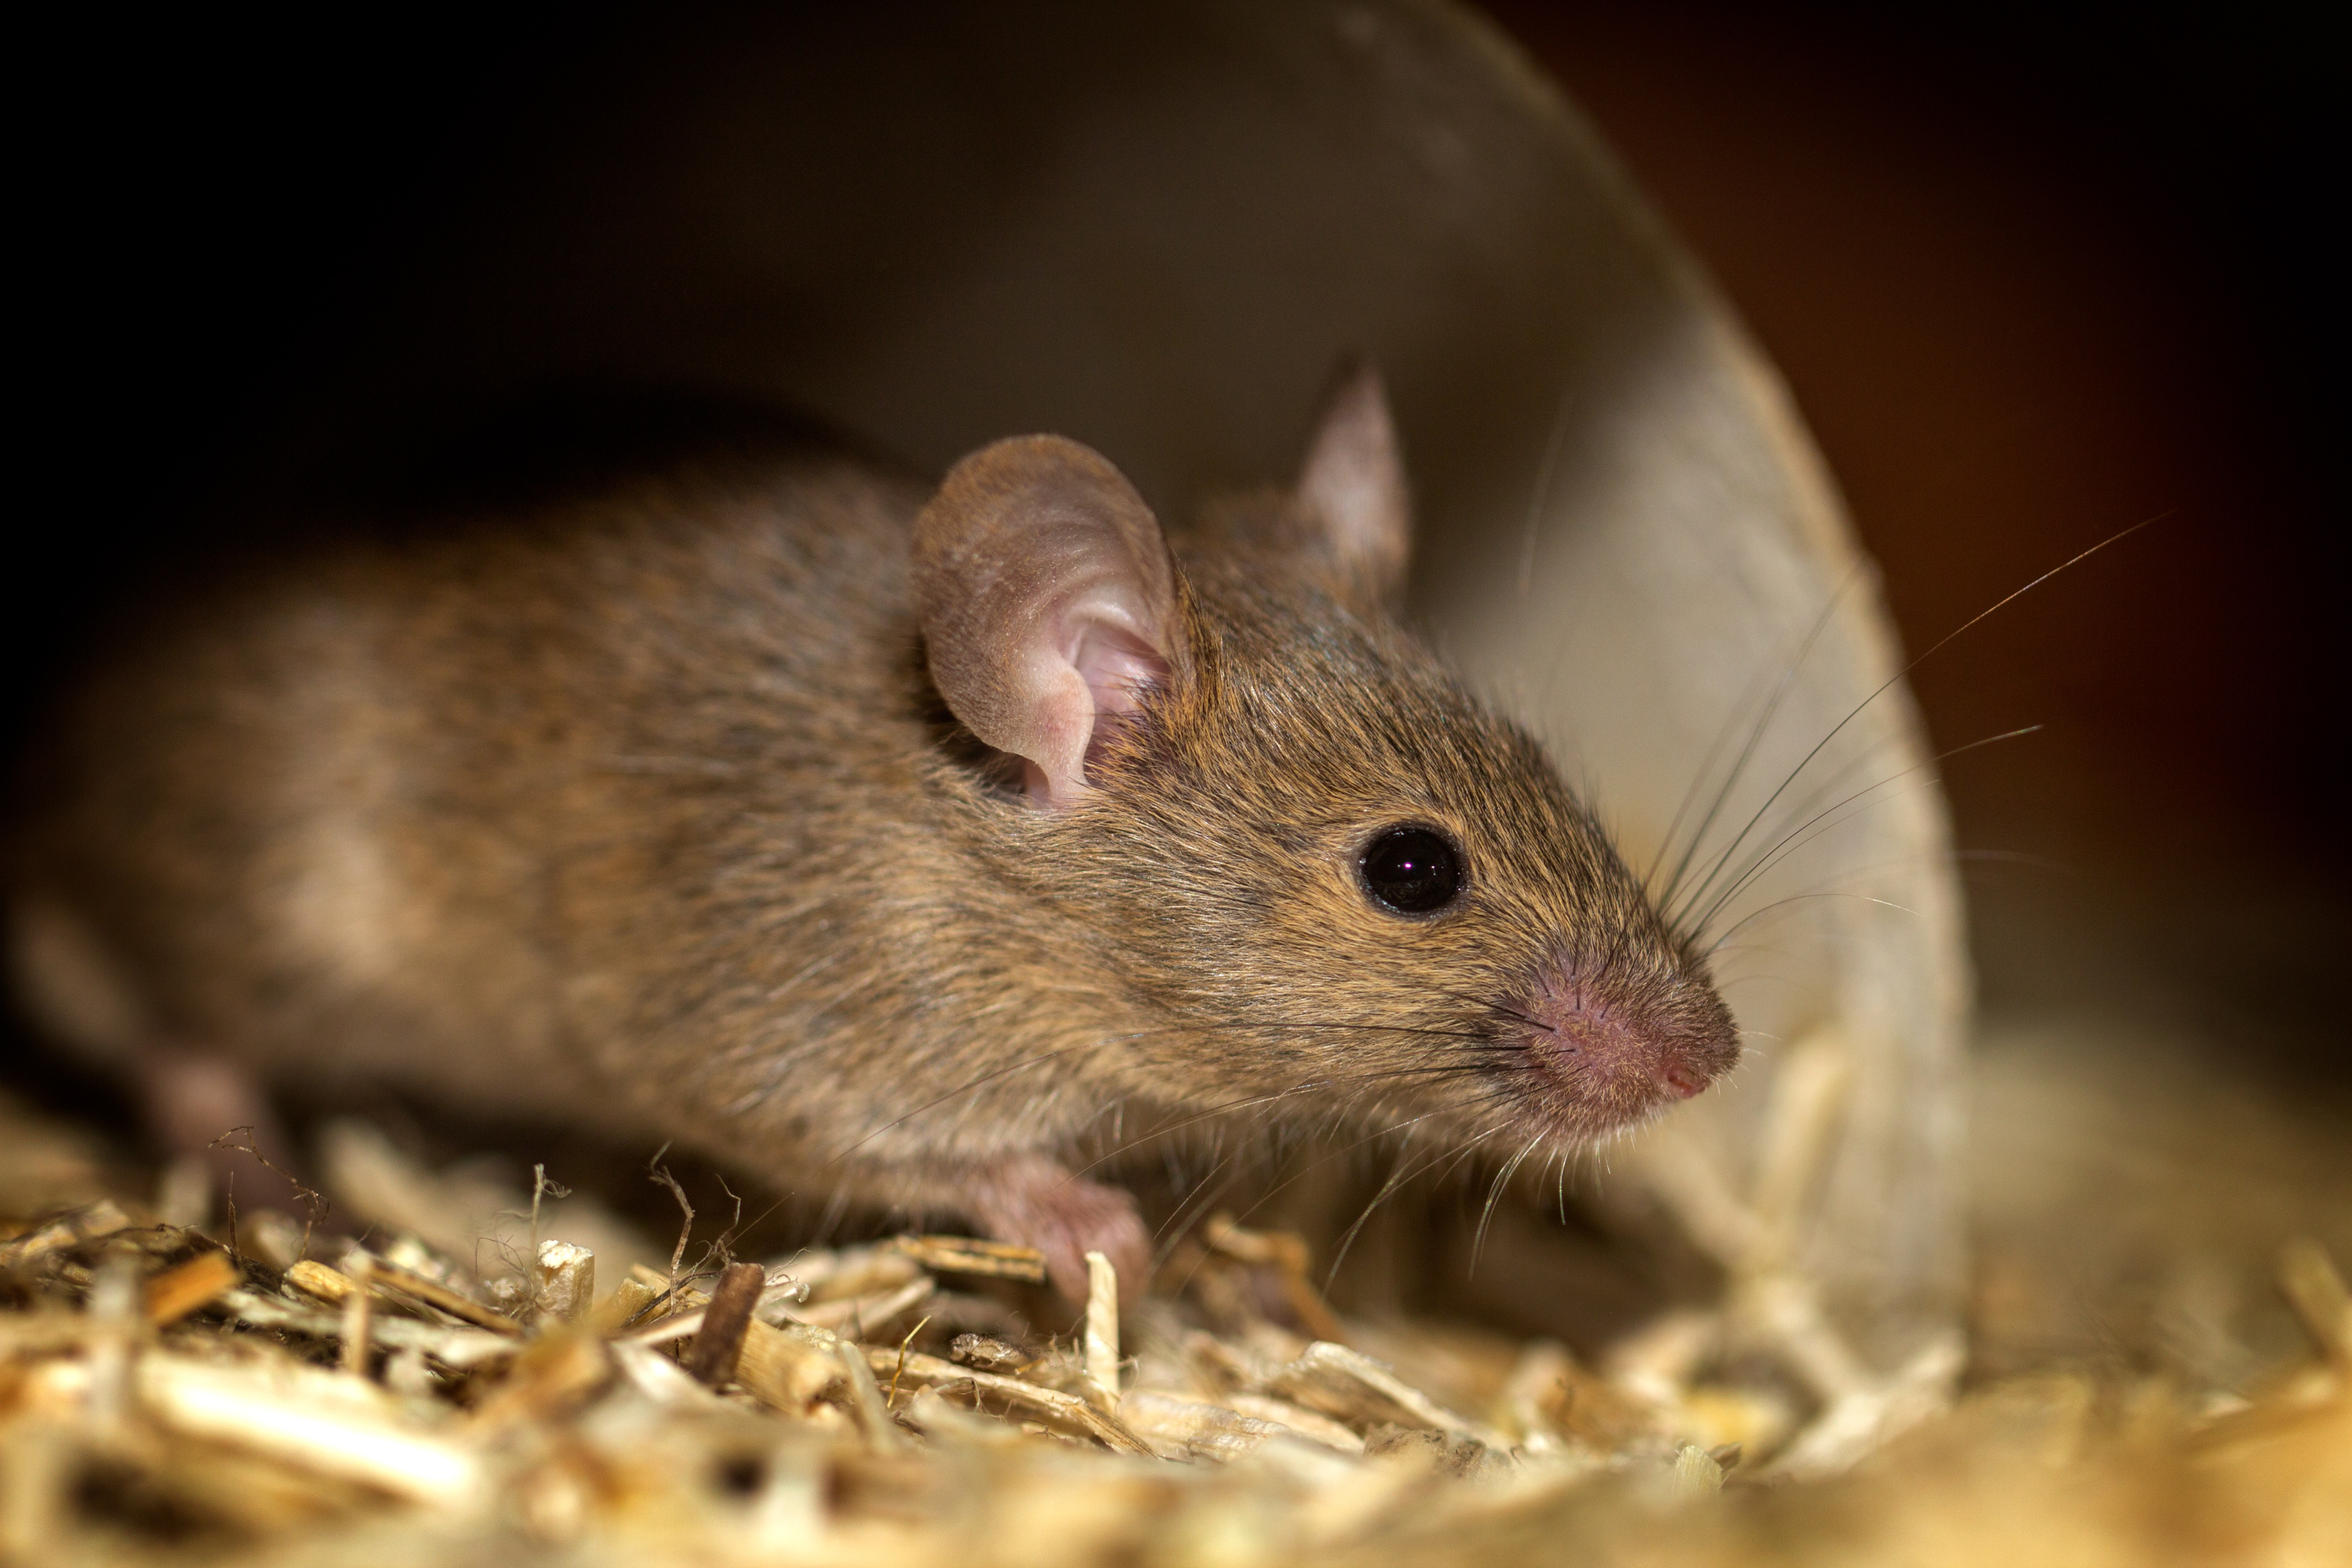 Obvious signs of mice infestation: a mouse building a nest inside your home